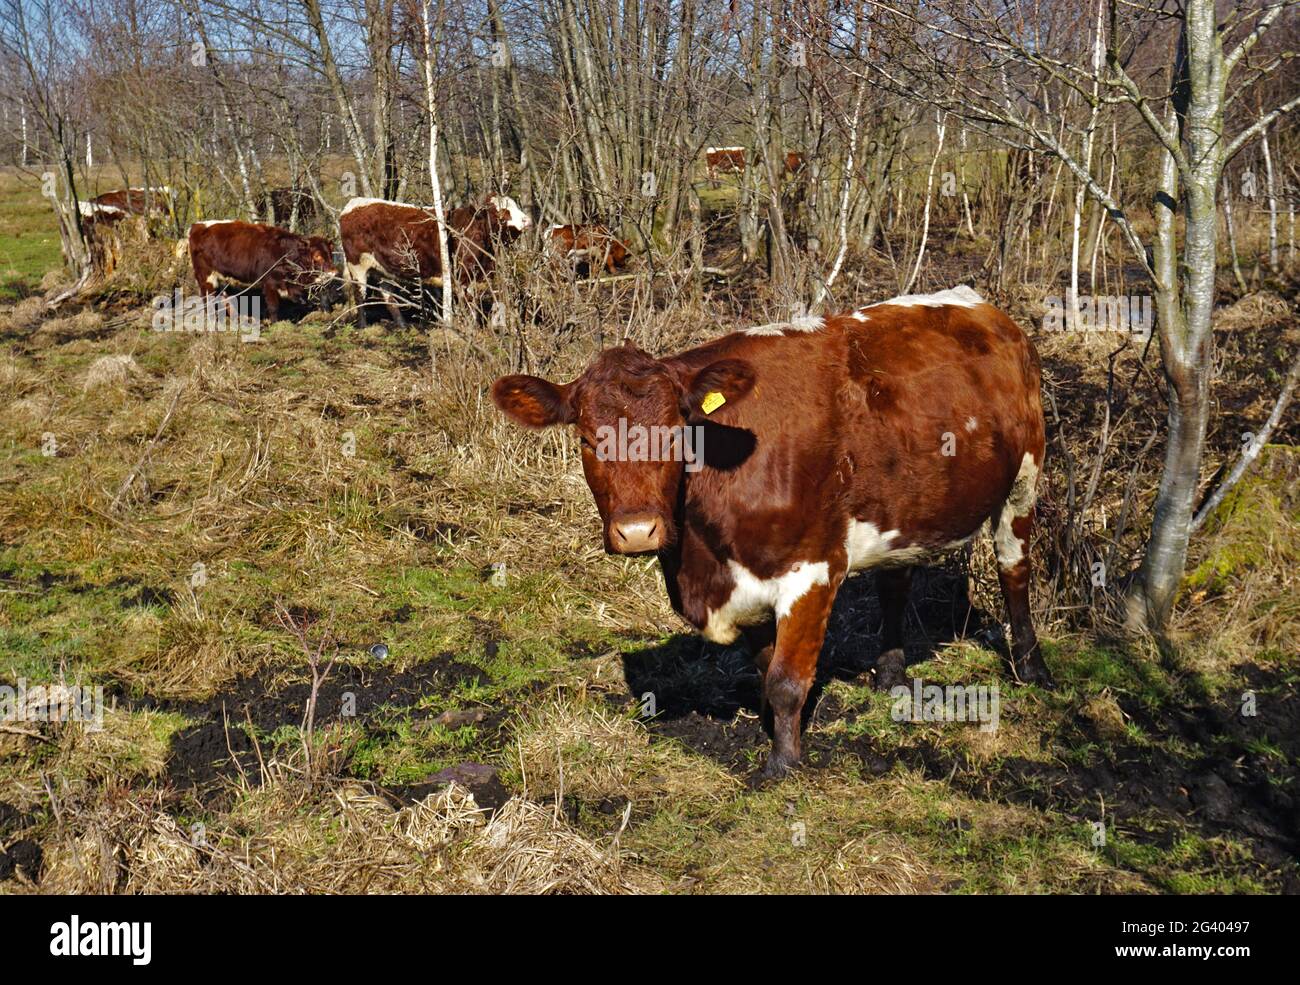 Pinzgau cattle in Pfrunger Ried, Upper Swabia, southern Germany Stock Photo